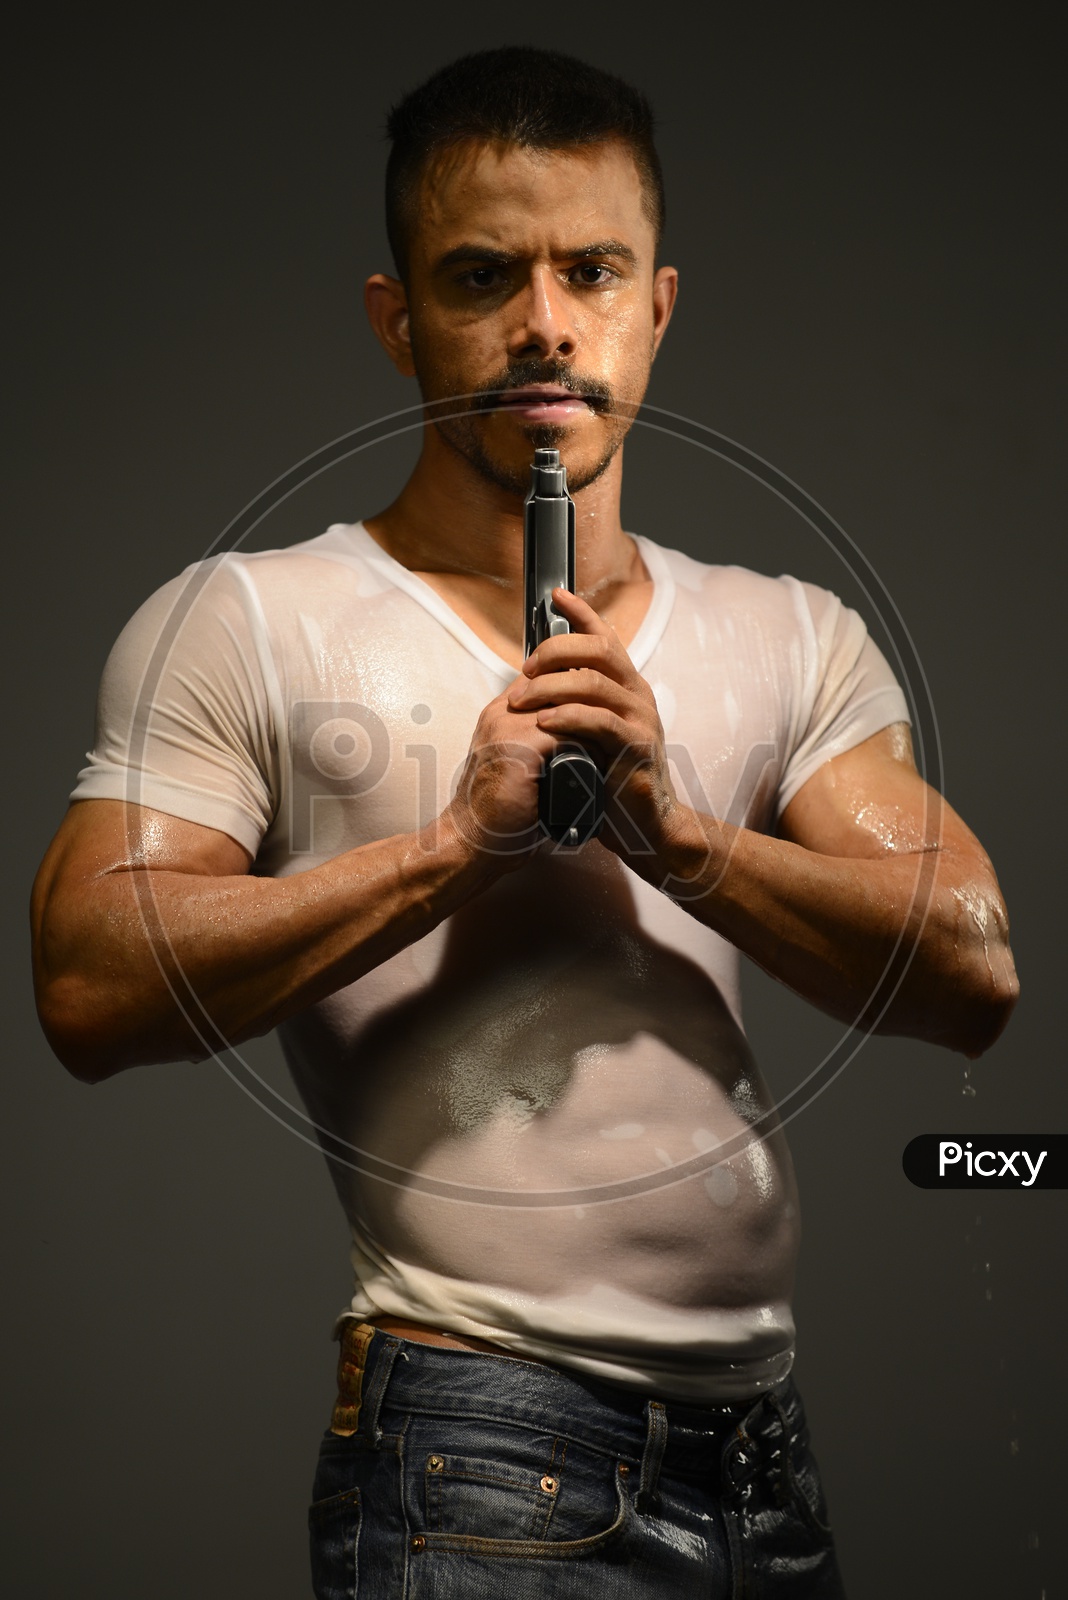 Drenched Indian Muscular Man pointing a gun to his face